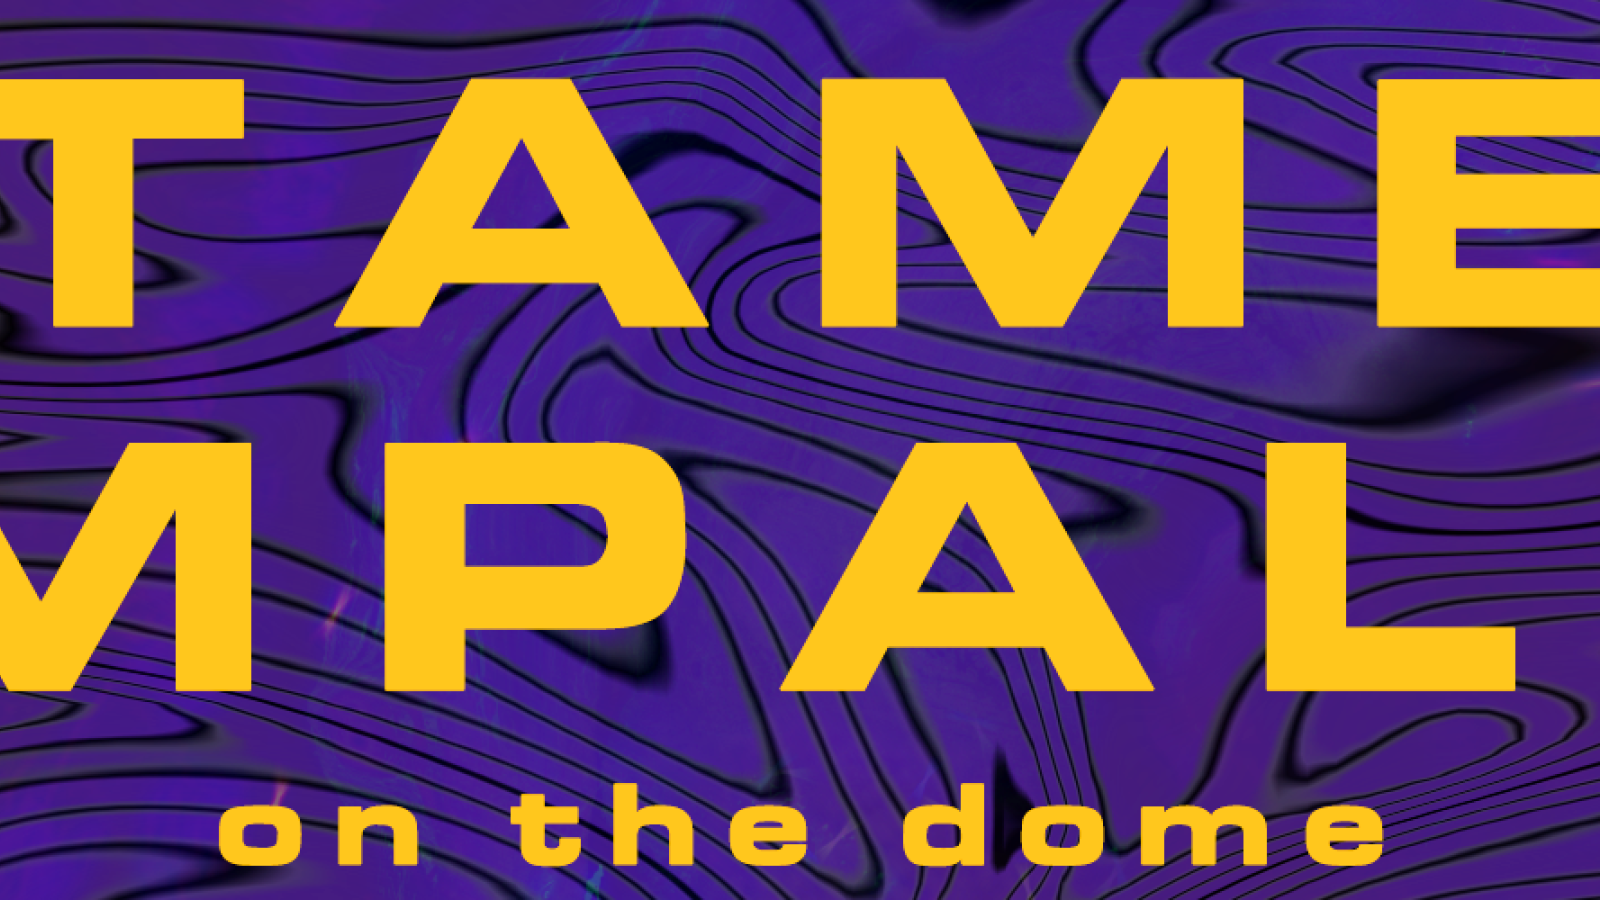 Gold Tame Impala on the Dome text over a purple and black swirl